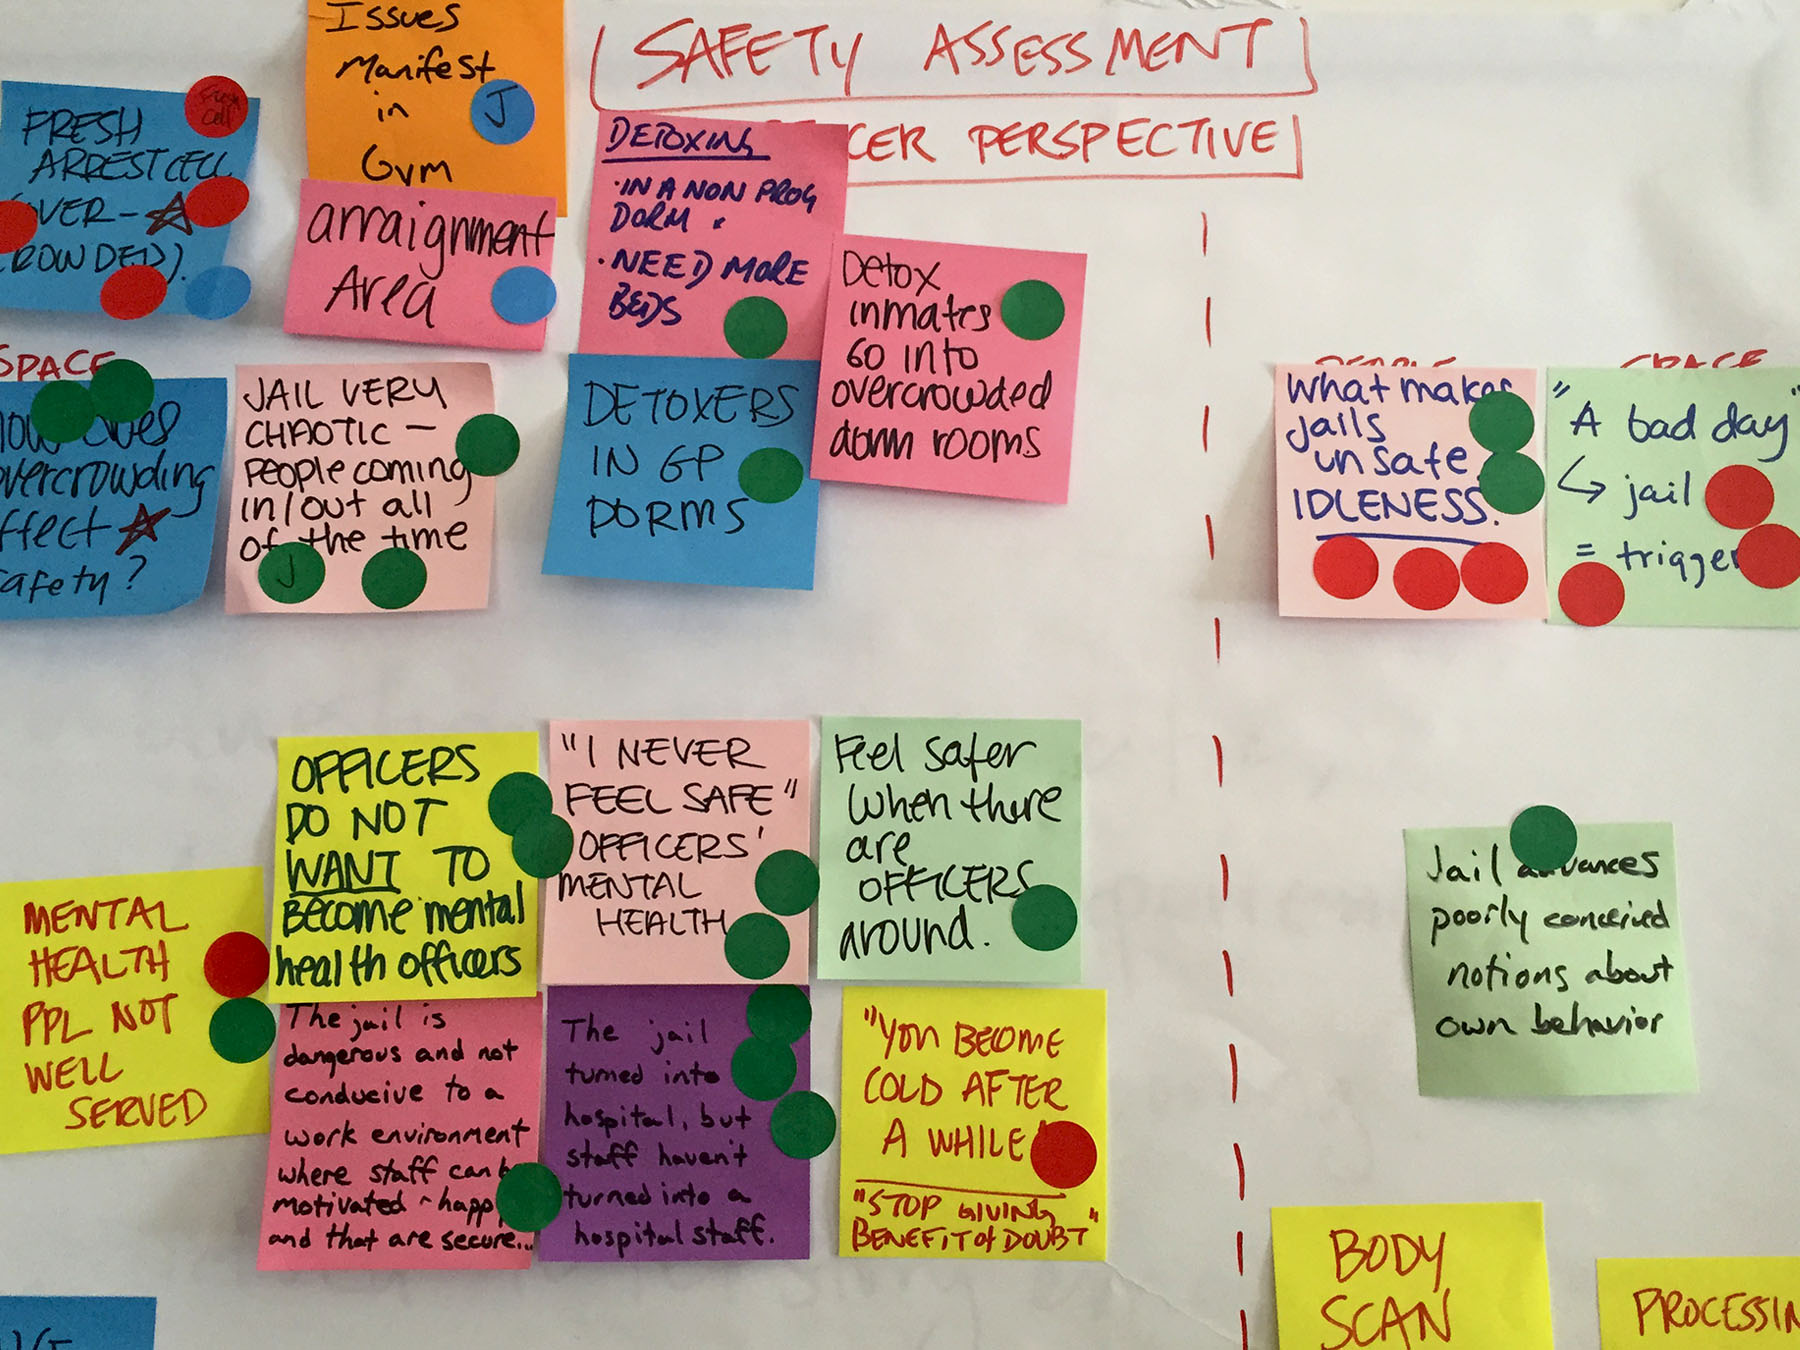 Different colored sticky notes cover a large sheet of paper from a brainstorm exploring police officers' perspectives on assessing safety.